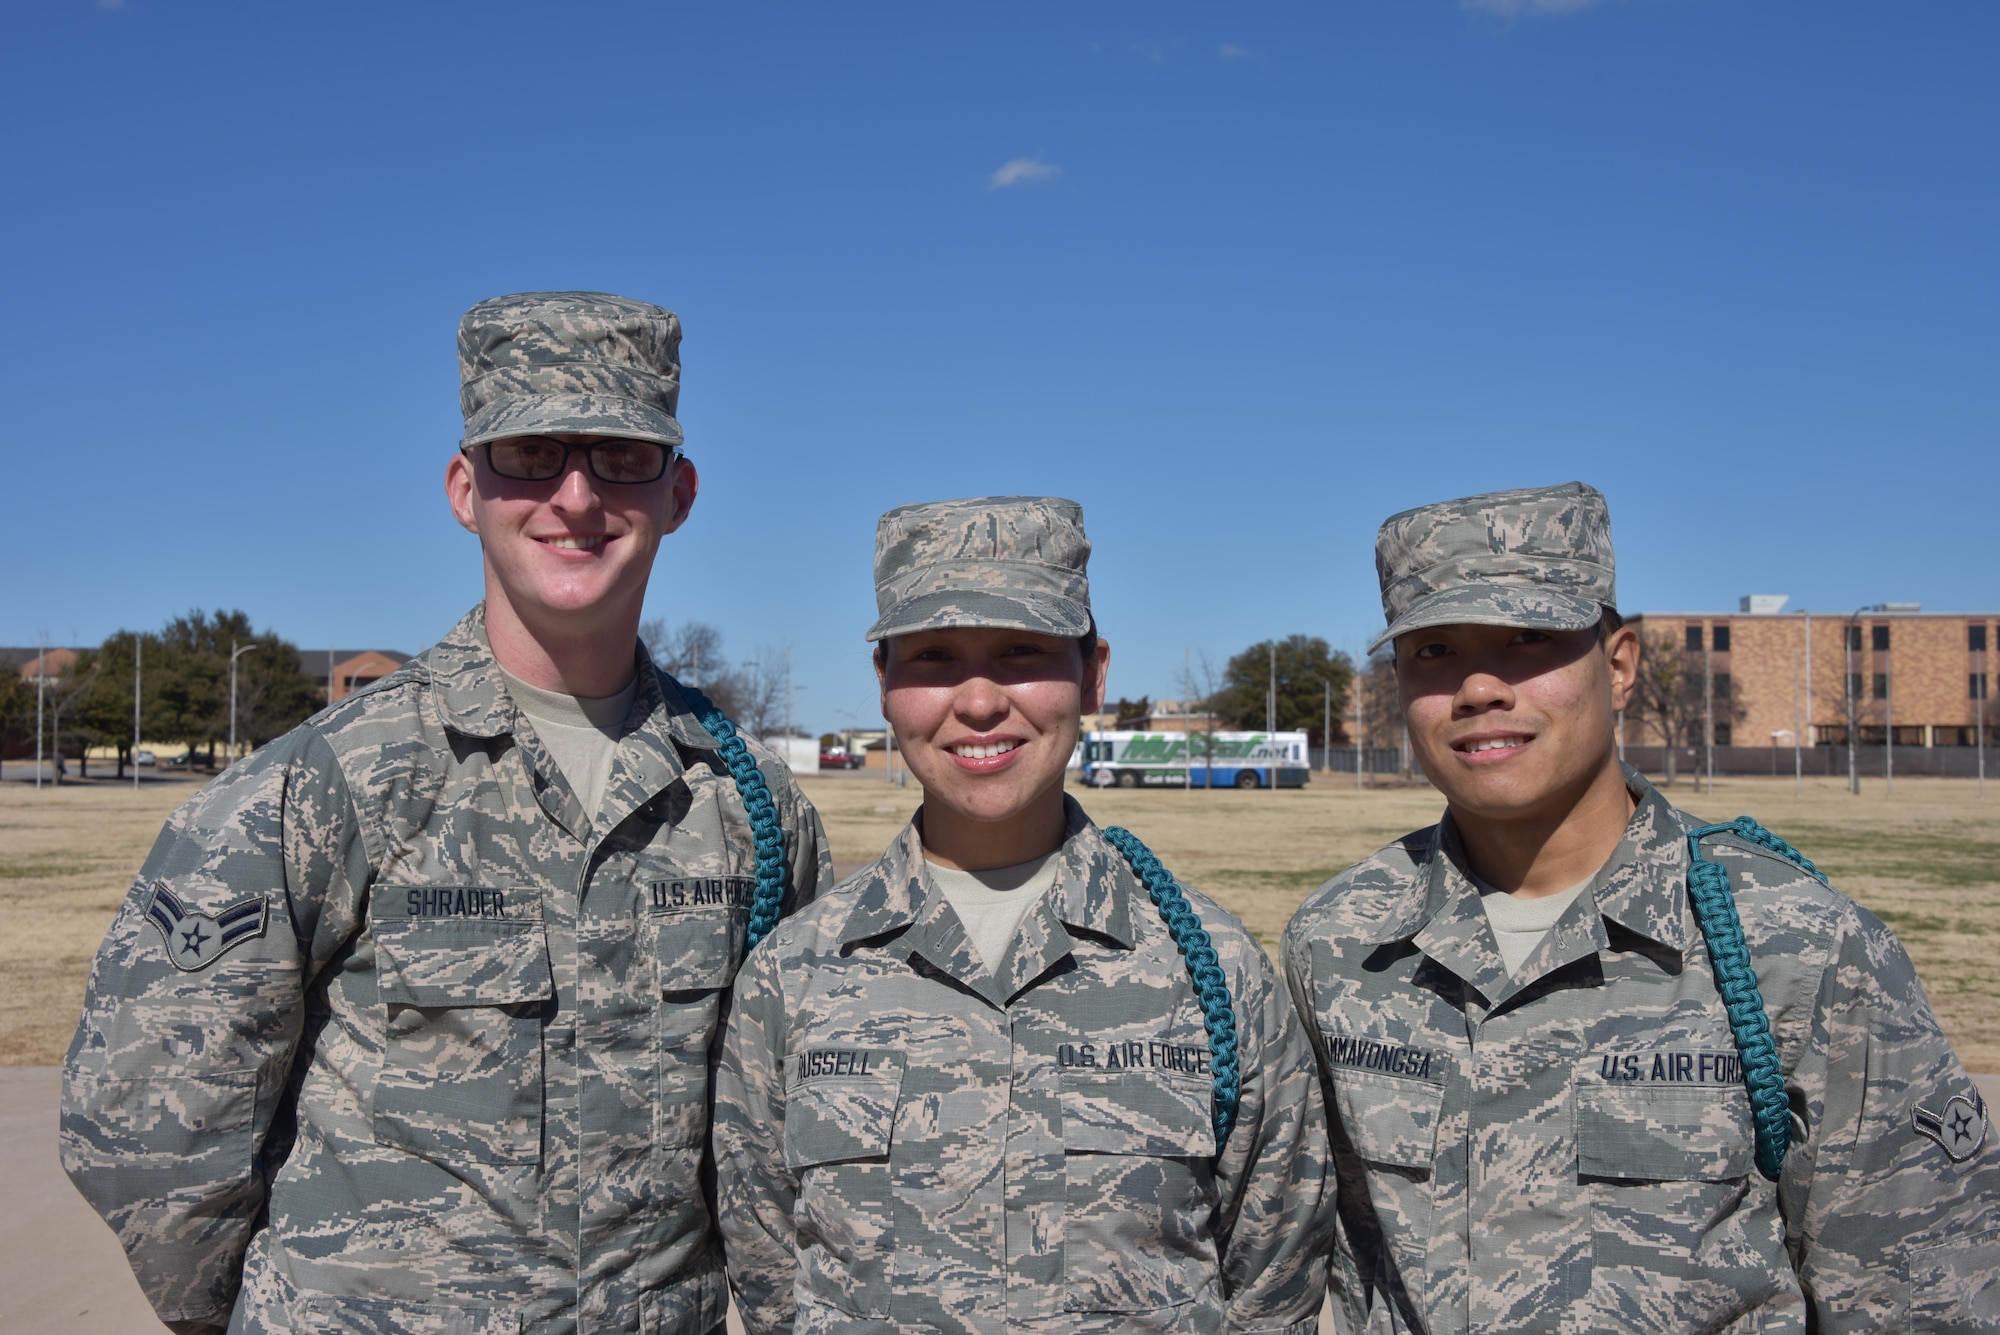 (From left to right) Airman 1st Class Kevin Schrader, Airman Carol Russell, and Airman 1st Class Richie Thammavonsa, noted as stand-out Airmen leaders, Teal Ropes,and Peer-to-Peer participants pose for a group photo at Sheppard Air Force Base, Texas. Every other Saturday these Airmen attend Peer-to-Peer to better develop themselves and those around them. “We come to learn ways to positively influence people,” said Russell, an F-15 avionics student and mother of two. “Then we go out and practice it among our peers, and they pick up on it. Then they practice it among their peers. As a whole, when we go to our different assignments, we get to continue this wherever we go.” (U.S. AIr Force photo by 2nd Lt. Brittany Curry)